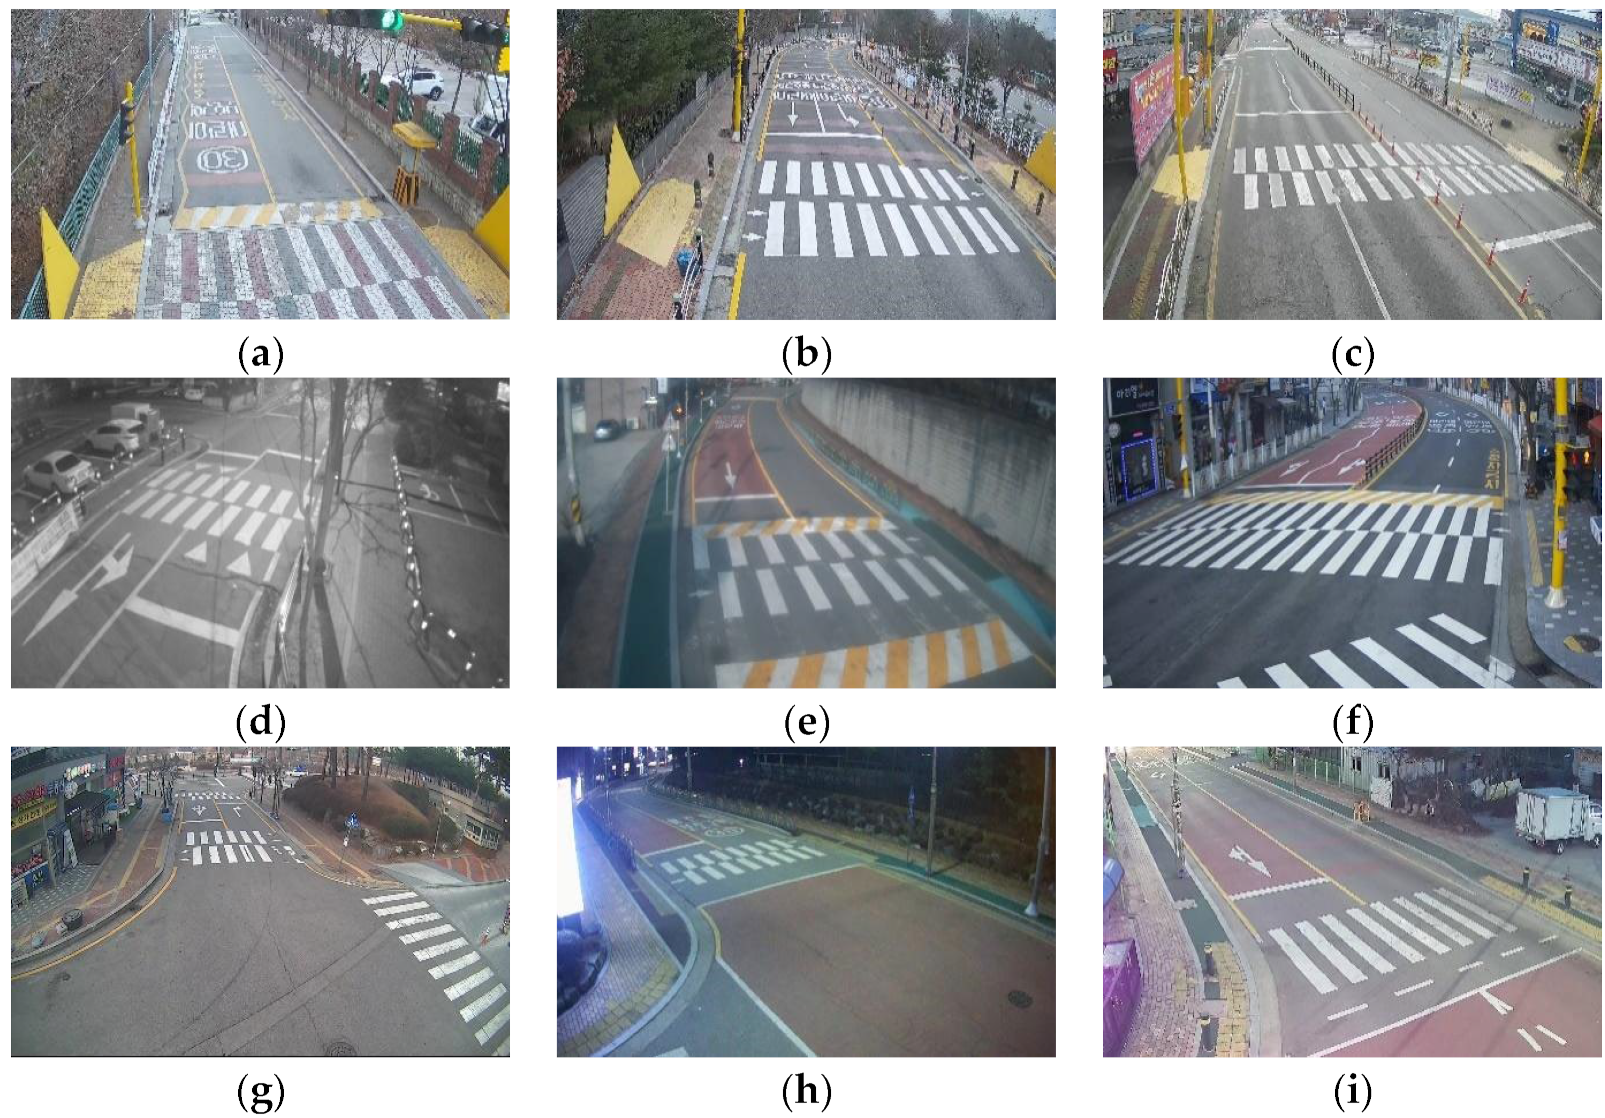 Next-gen pedestrian crossing aims to use IoT to improve safety - Smart  Cities World